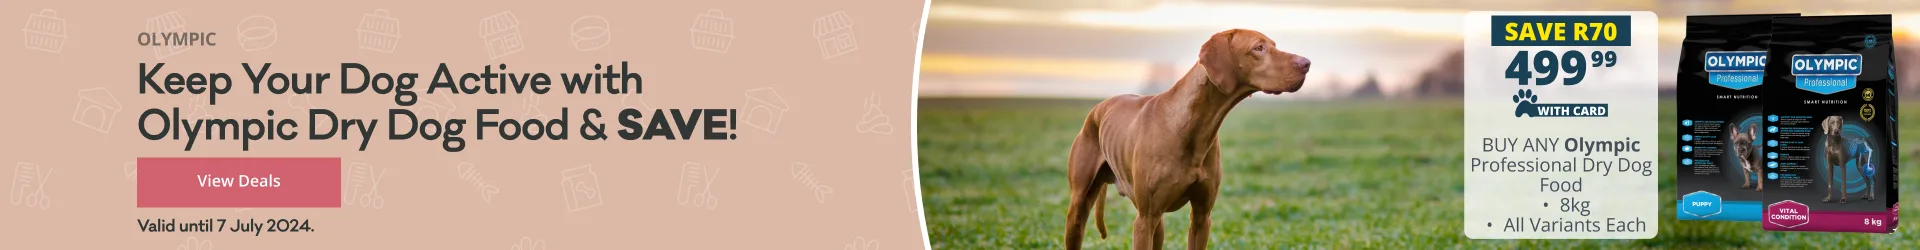 Keep your dog active with Olympic Dry Dog Food and save at Petshop Science. Click to view deals. Valid until 7 July 2024.